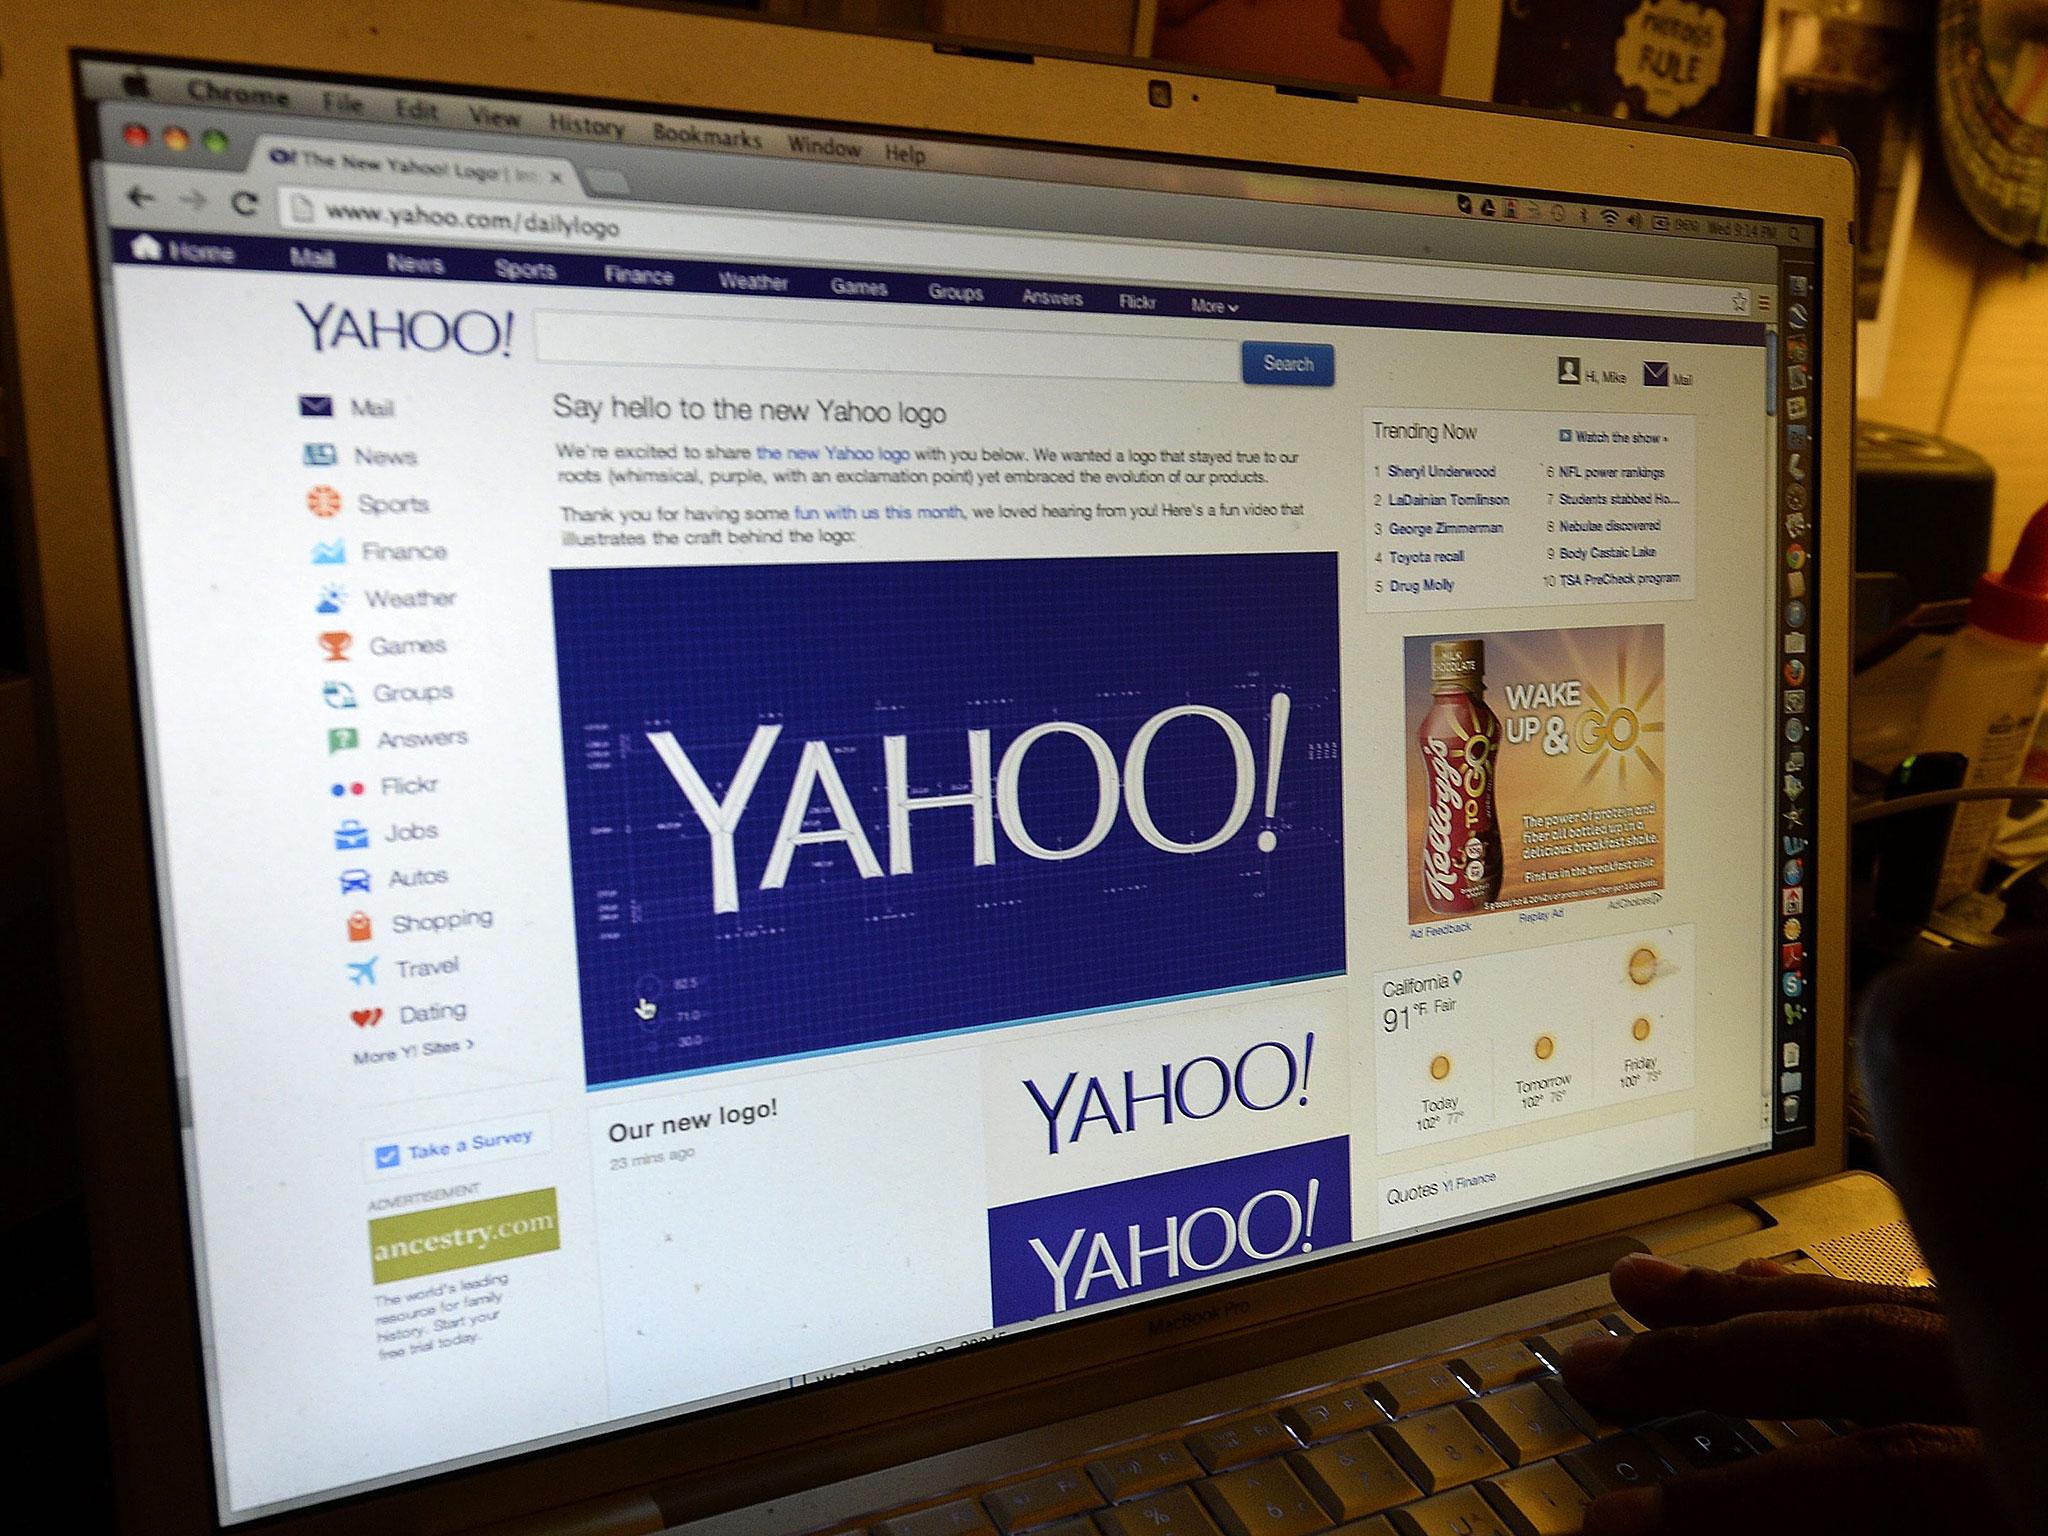 Yahoo, which was founded in 1994, controlled a significant part of the market in the early days of the internet, but has since struggled to compete